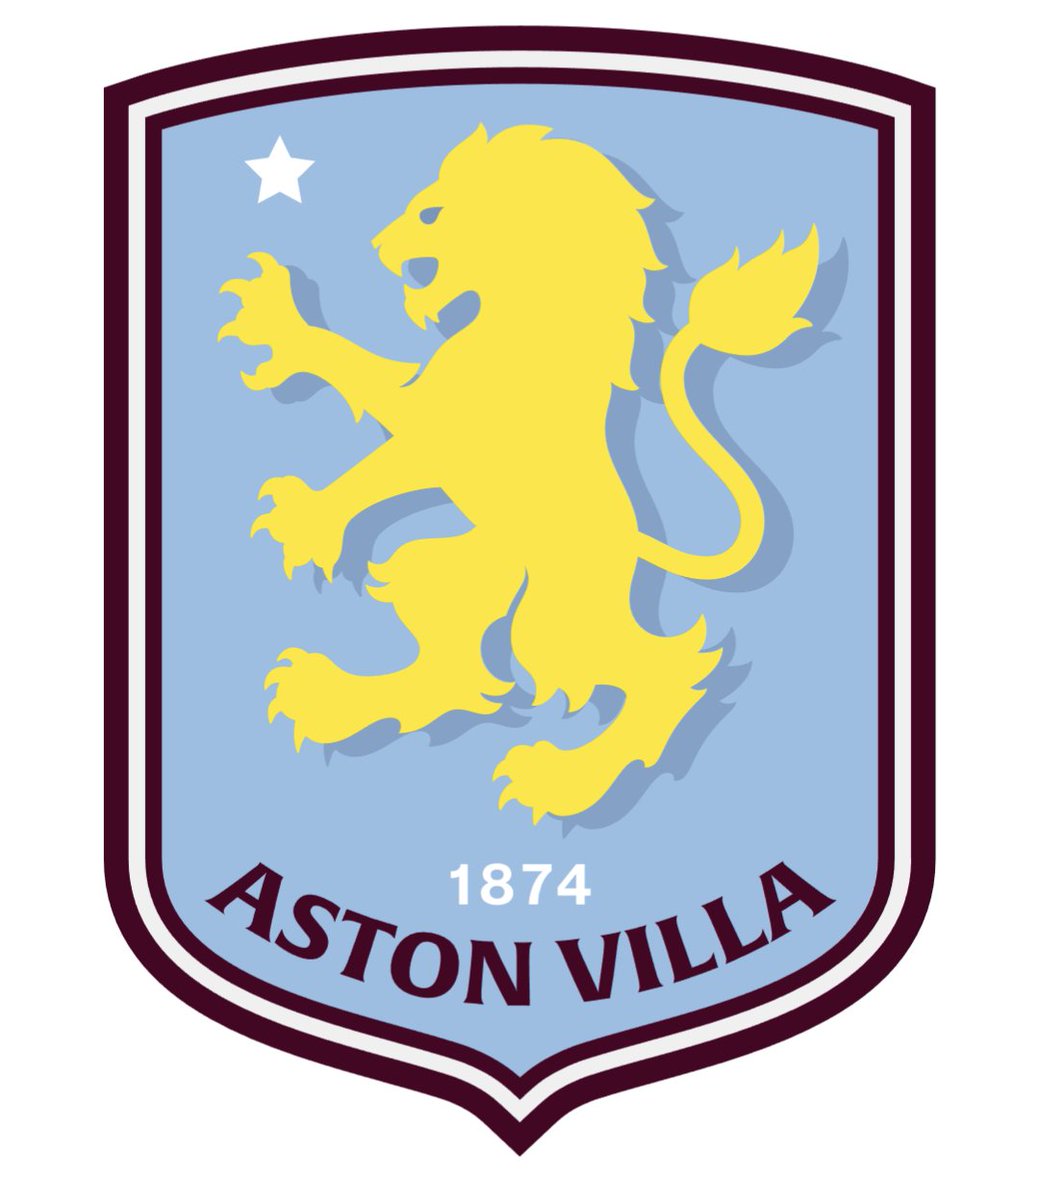 A much better version of the New Crest, X always produces poor quality once you click on a profile pic. The Claret is spot on for me, I personally really like the new badge. The video showcases the finer details on inspiration. UP THE VILLA #avfc